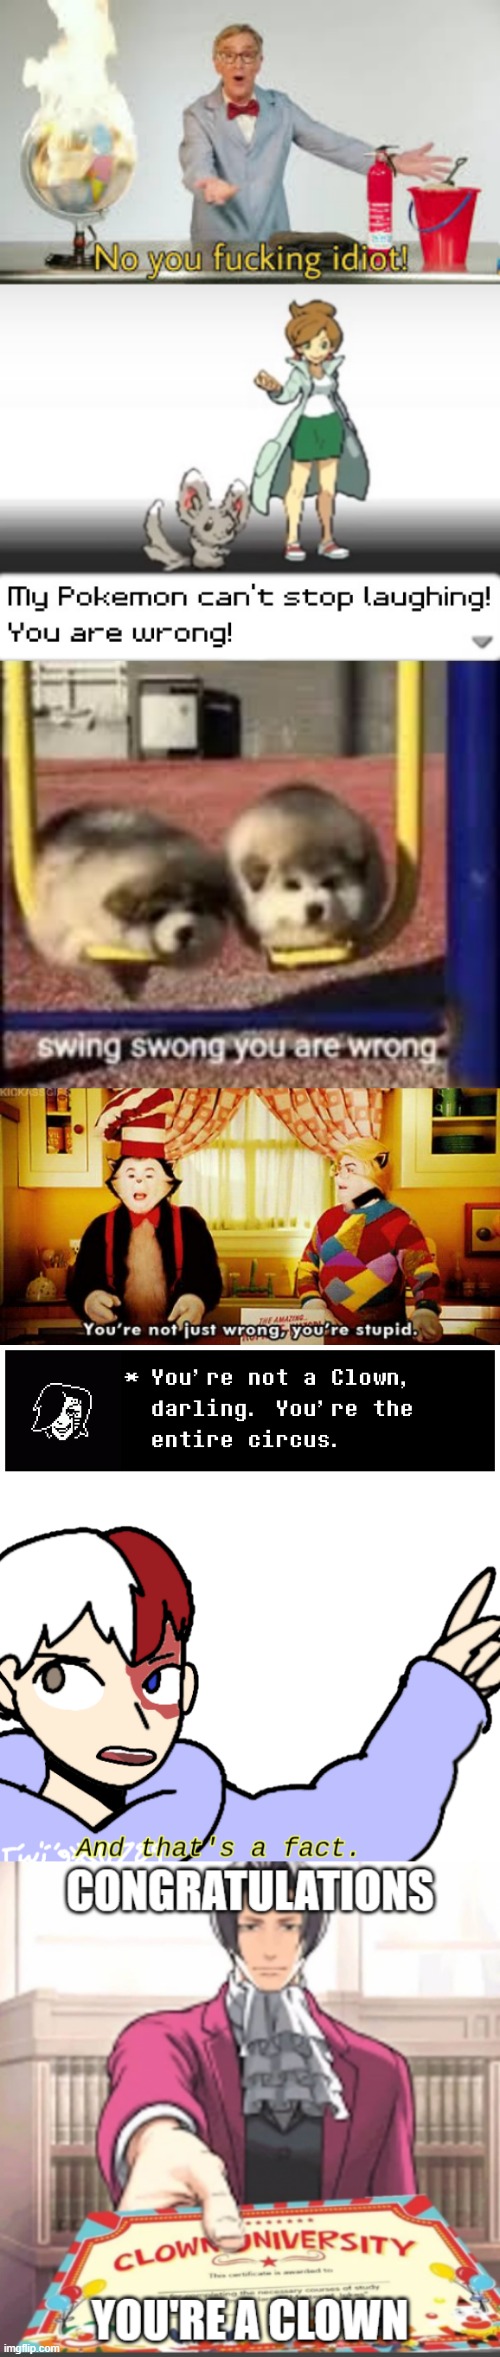 image tagged in no you fucking idiot,my pokemon can't stop laughing you are wrong,swing swong,you're not just wrong you're stupid | made w/ Imgflip meme maker